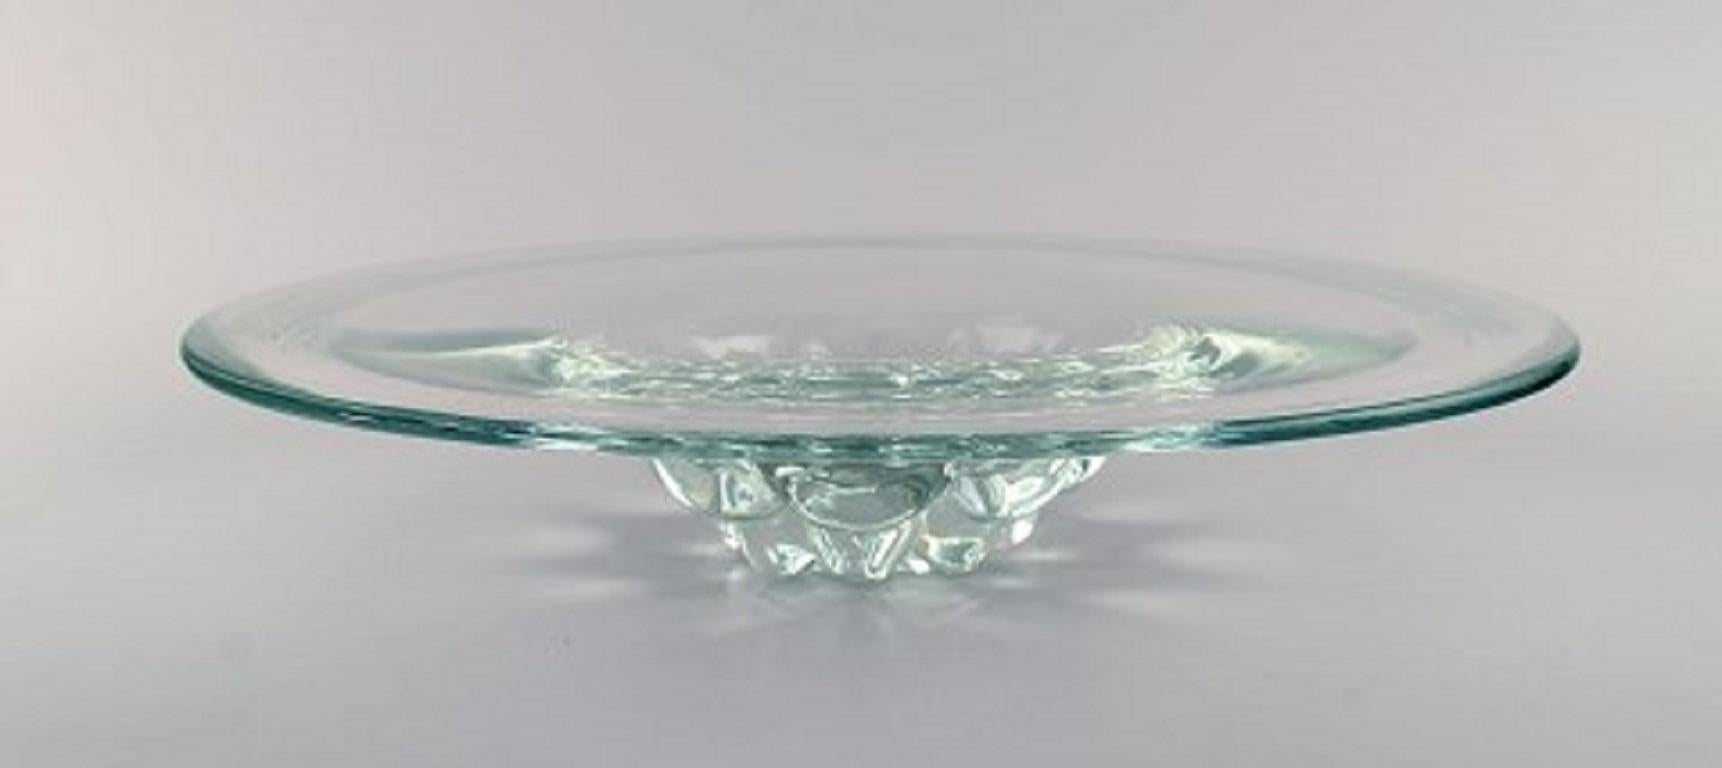 Scandinavian glass artist. Large bowl in mouth-blown art glass, 1960s-1970s.
Measures: 37.5 x 7.5 cm.
In very good condition.